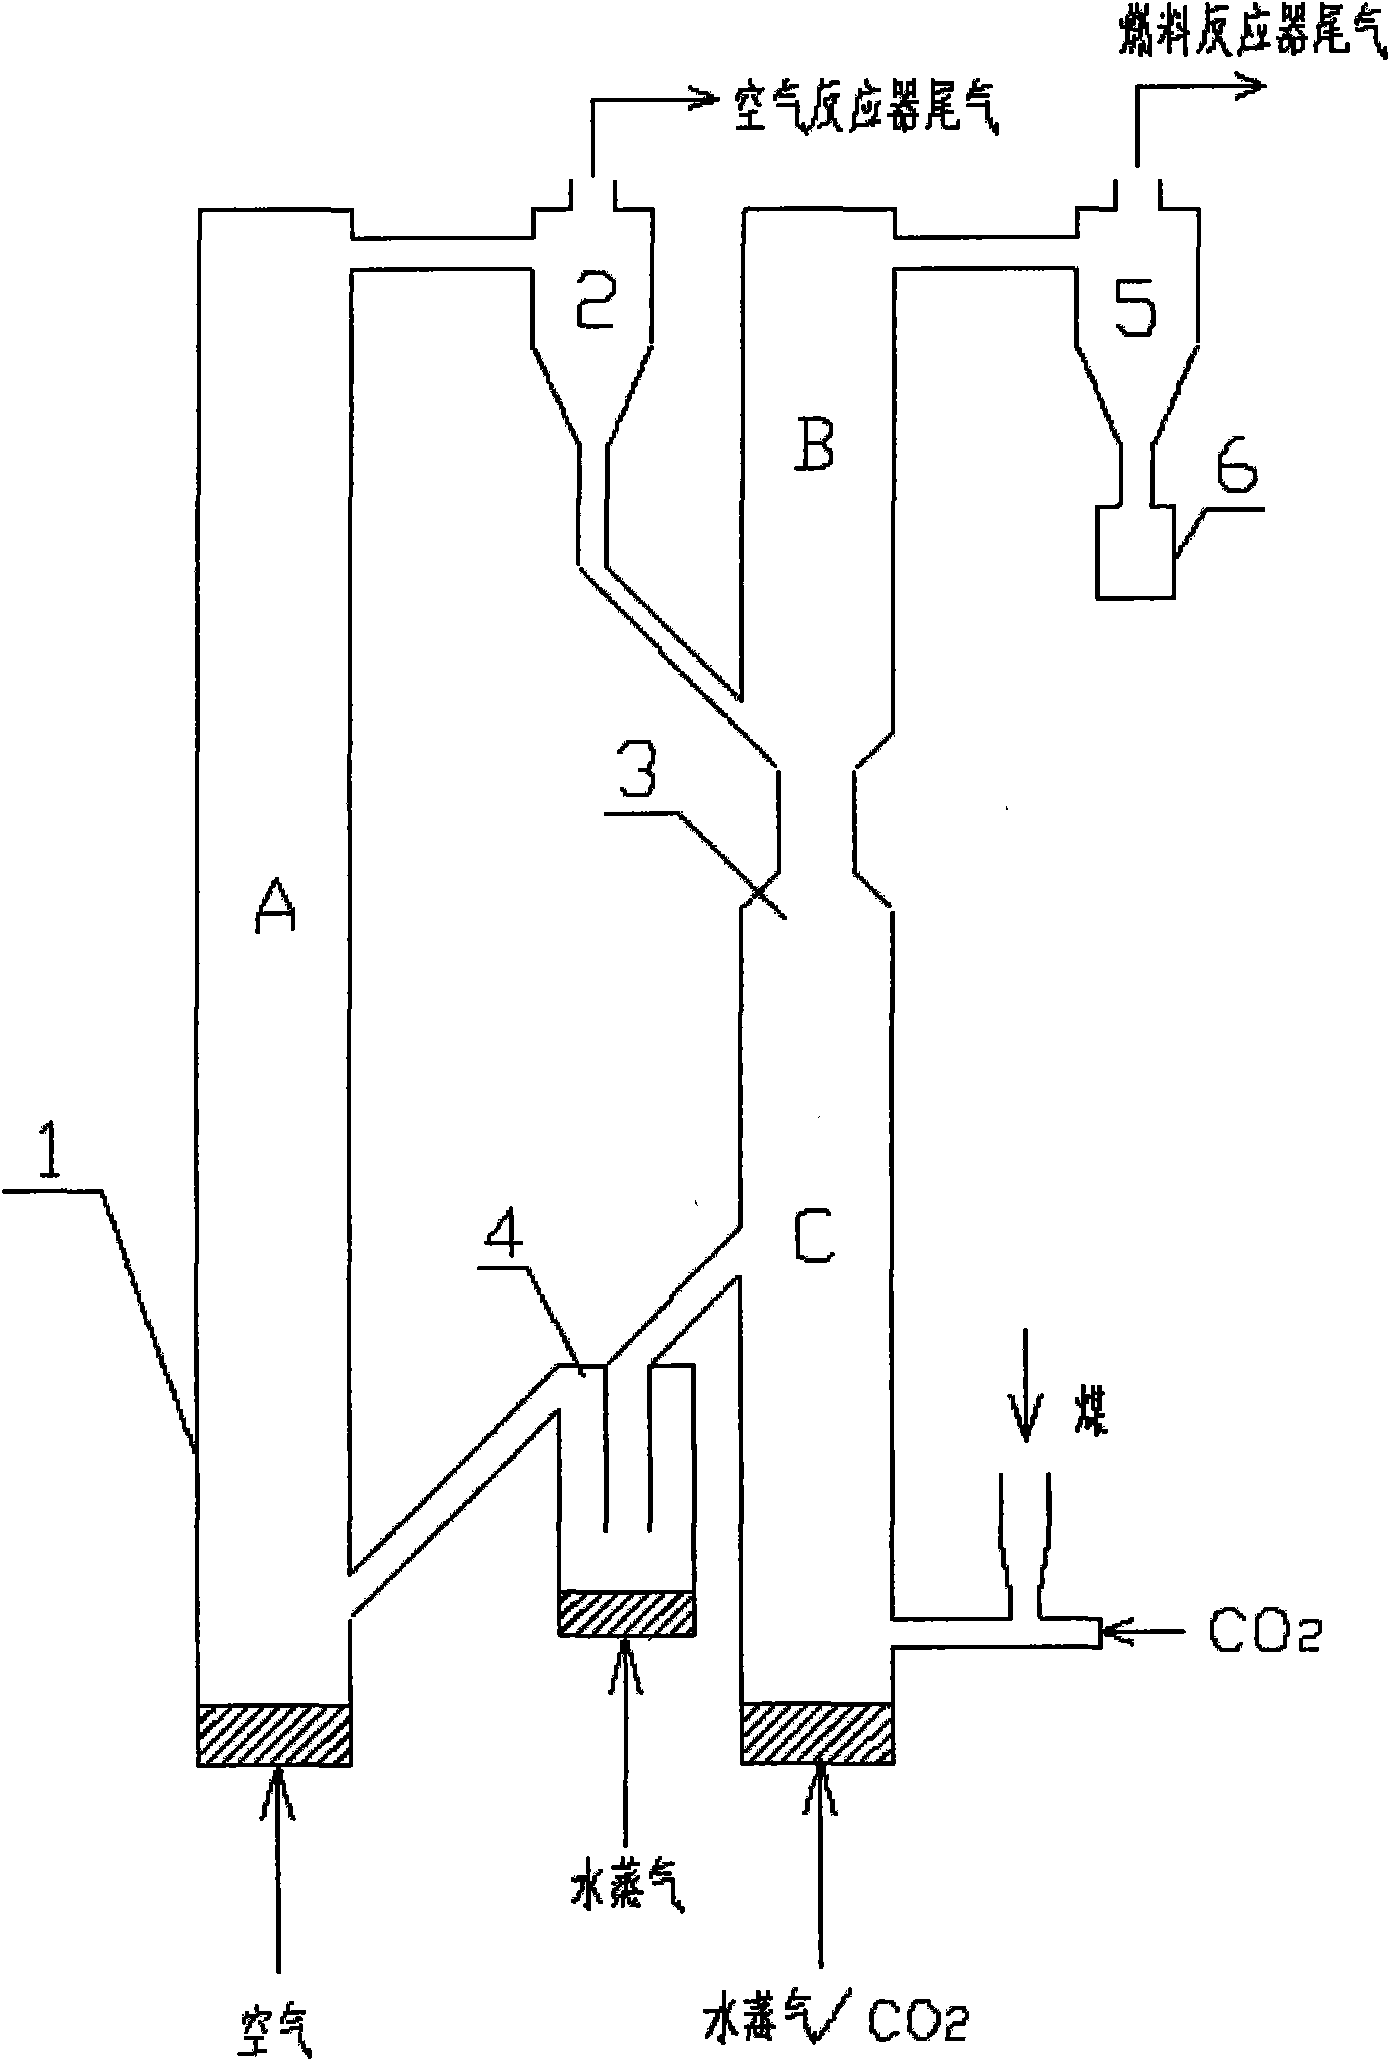 Pulverized coal combustion method and device with function of capturing CO2